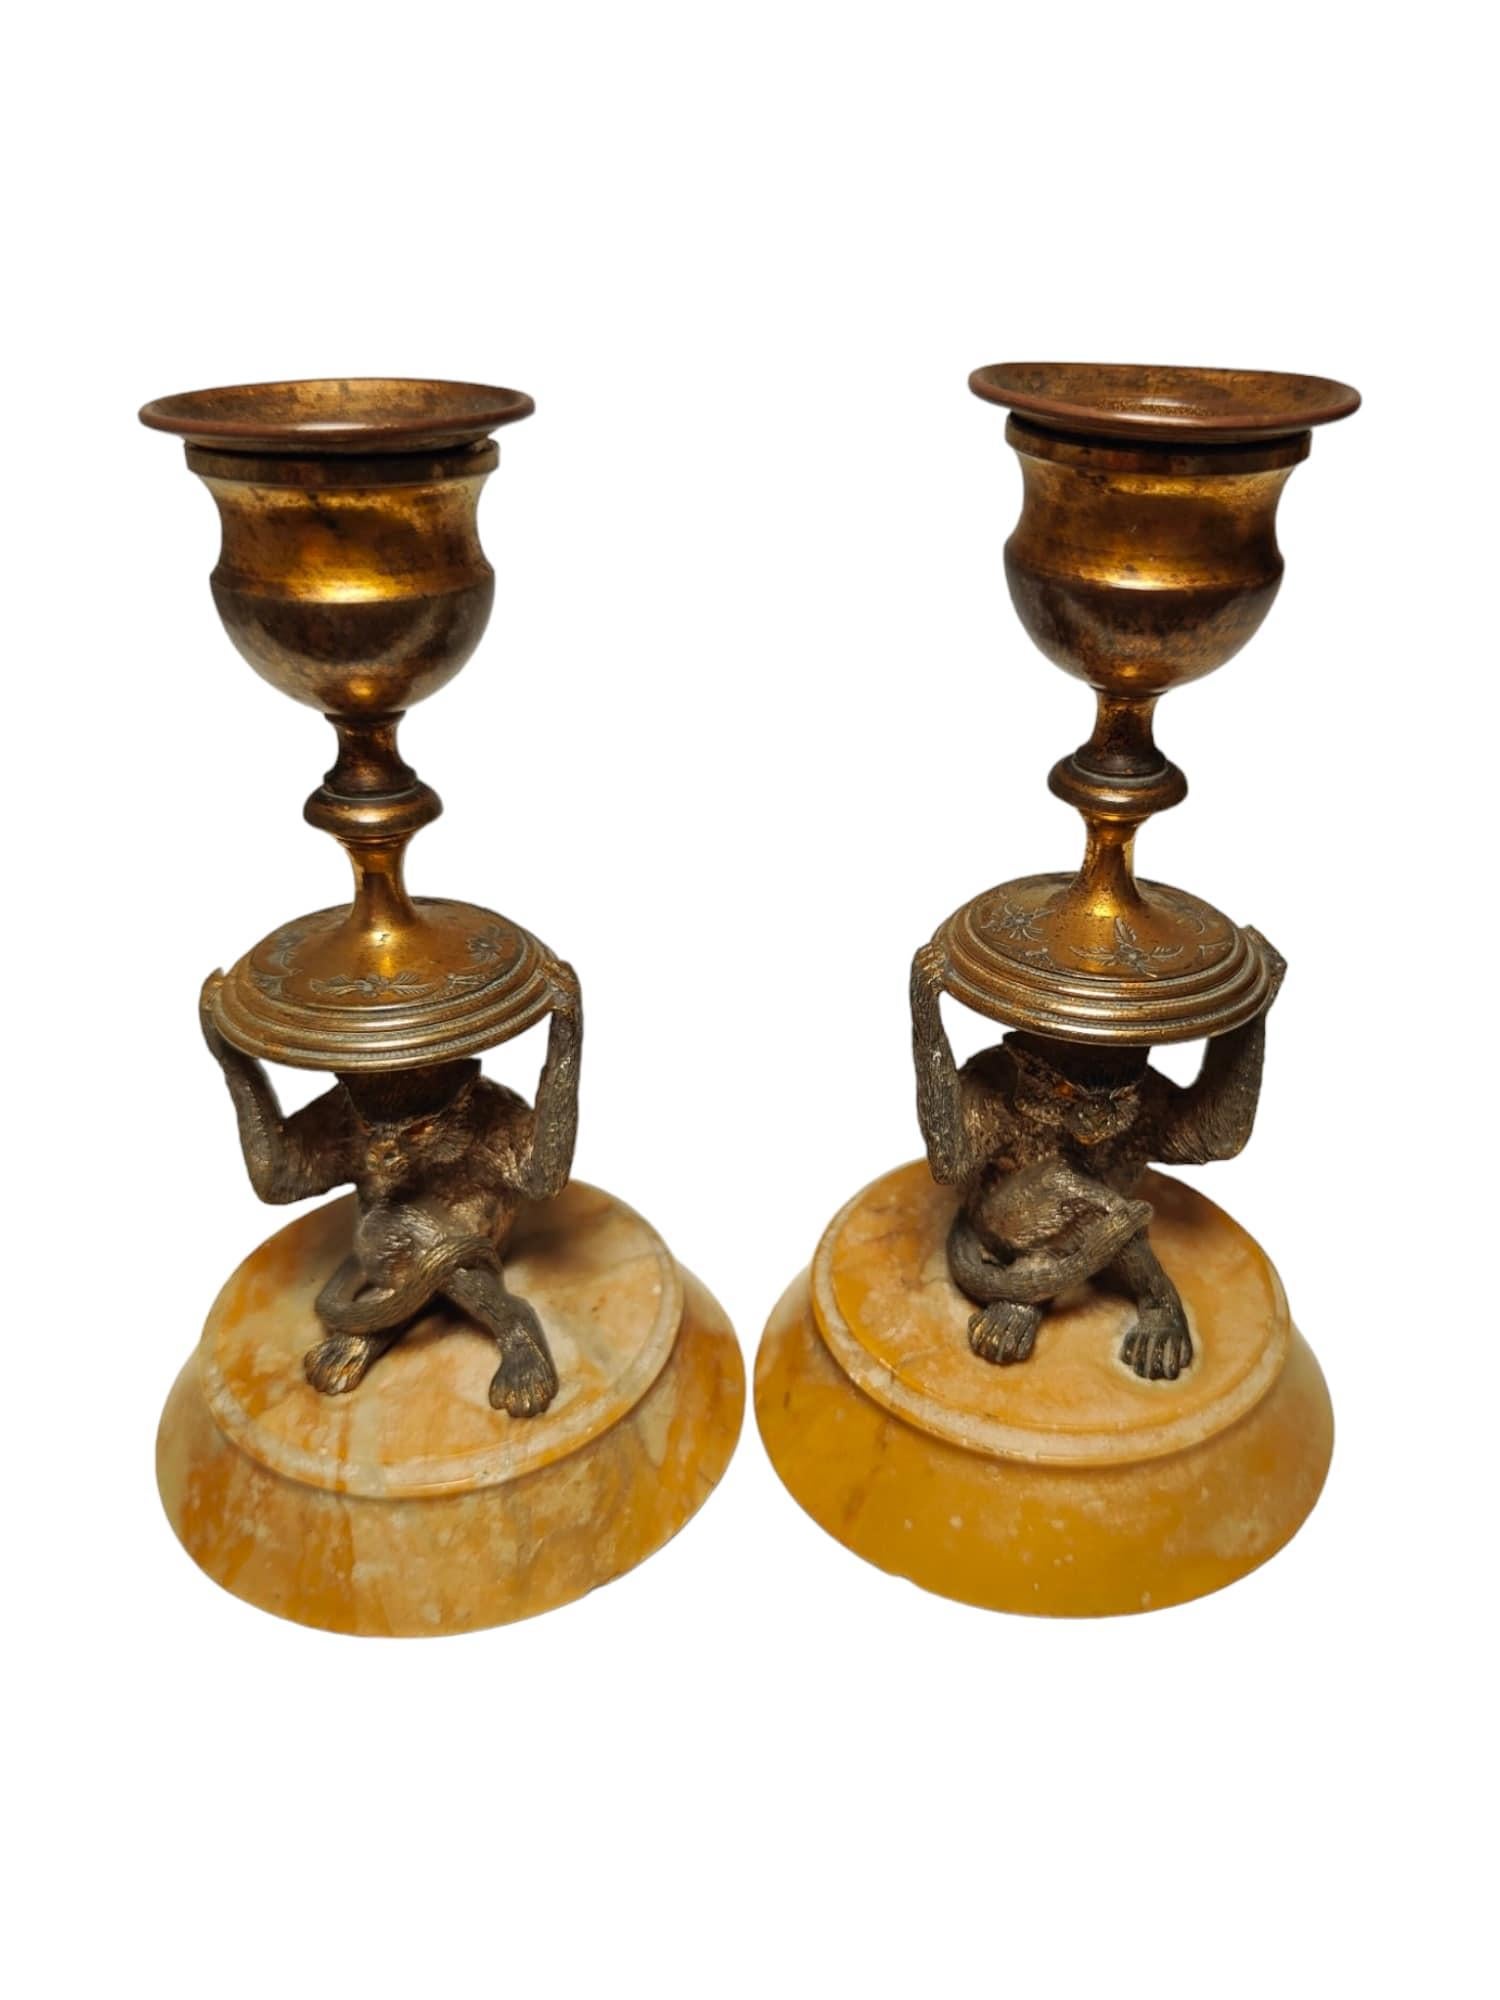 Pair of Miniature Monkey Candlesticks from the 19th Century For Sale 2